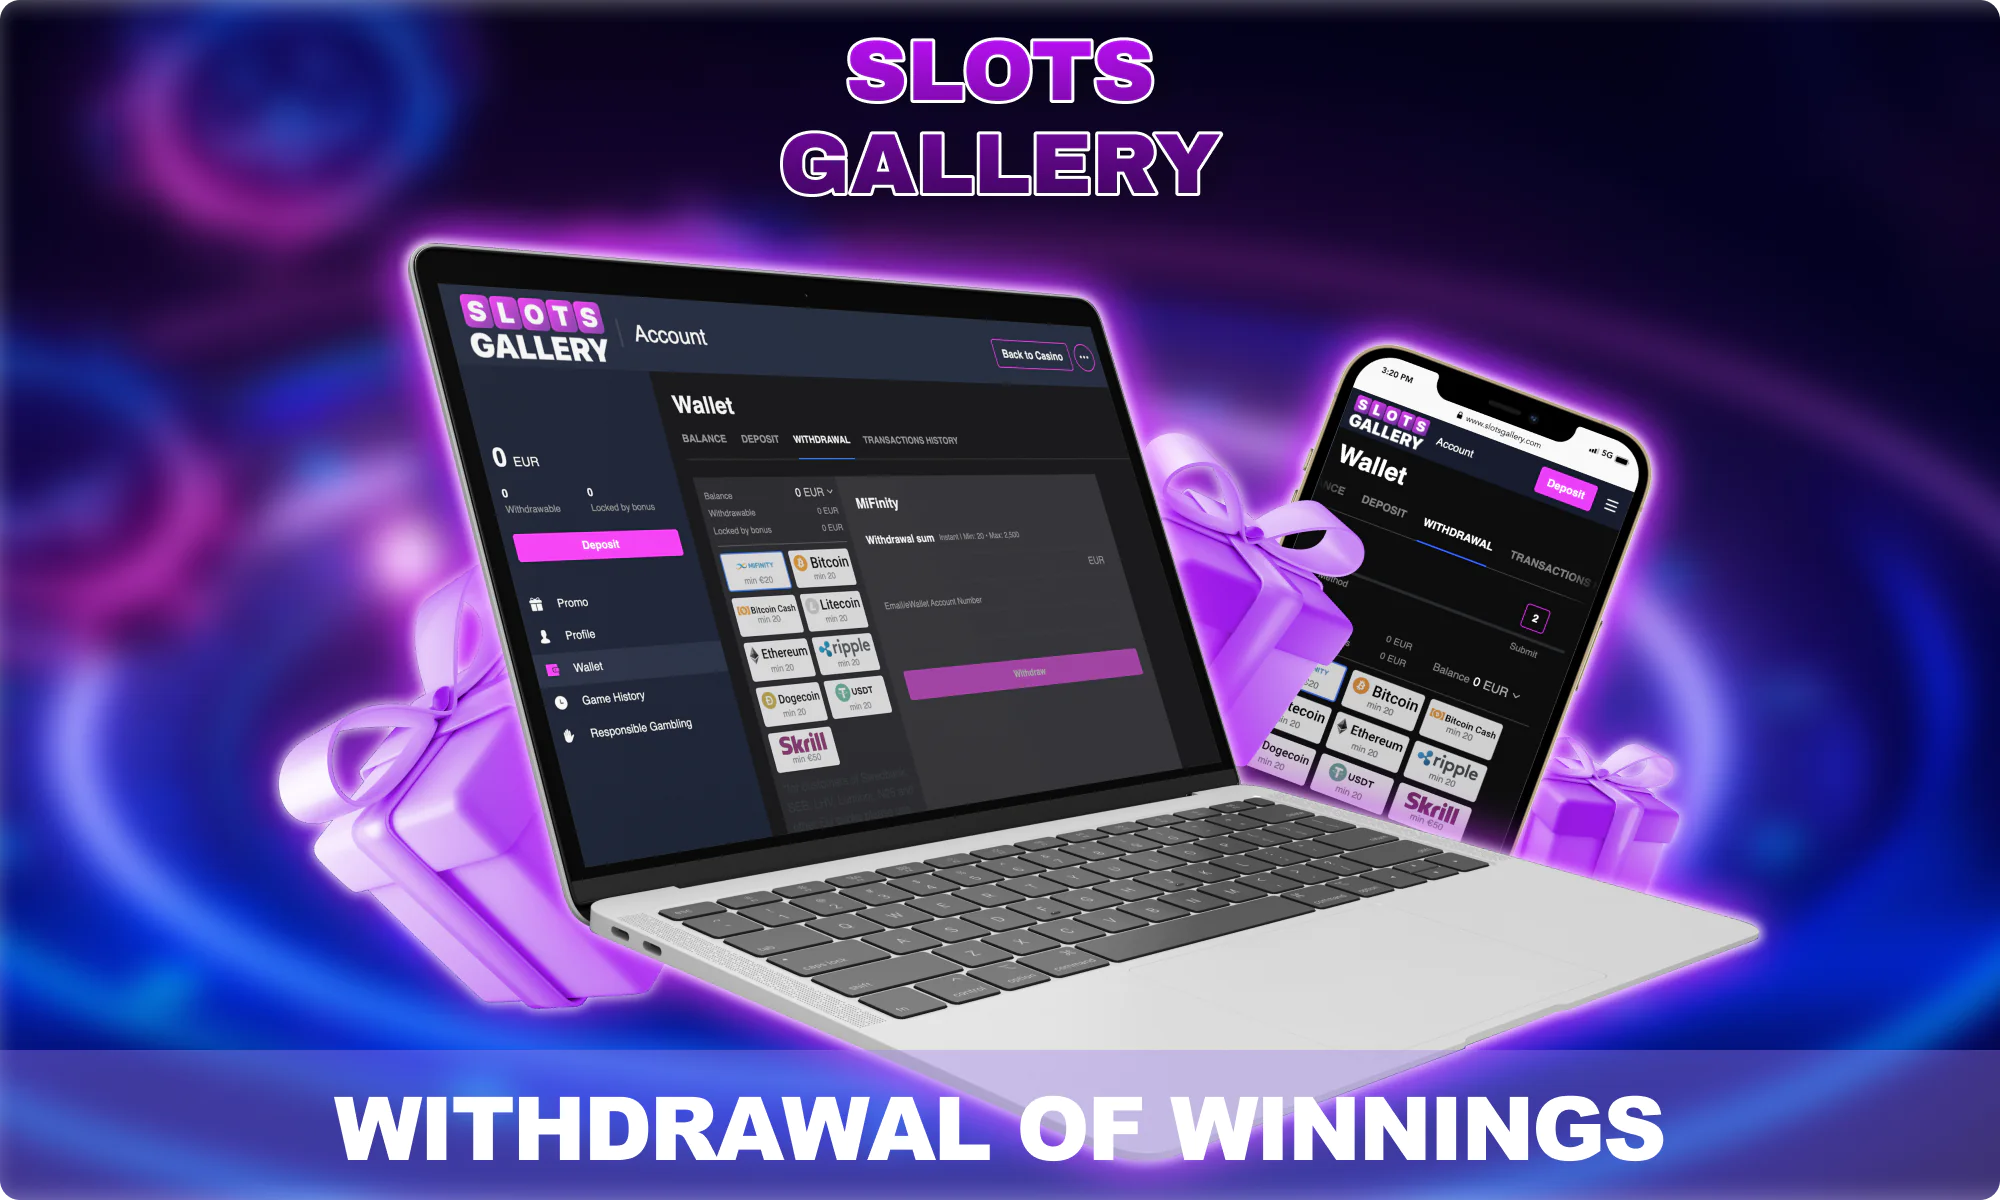 Withdraw money from Slots Gallery account